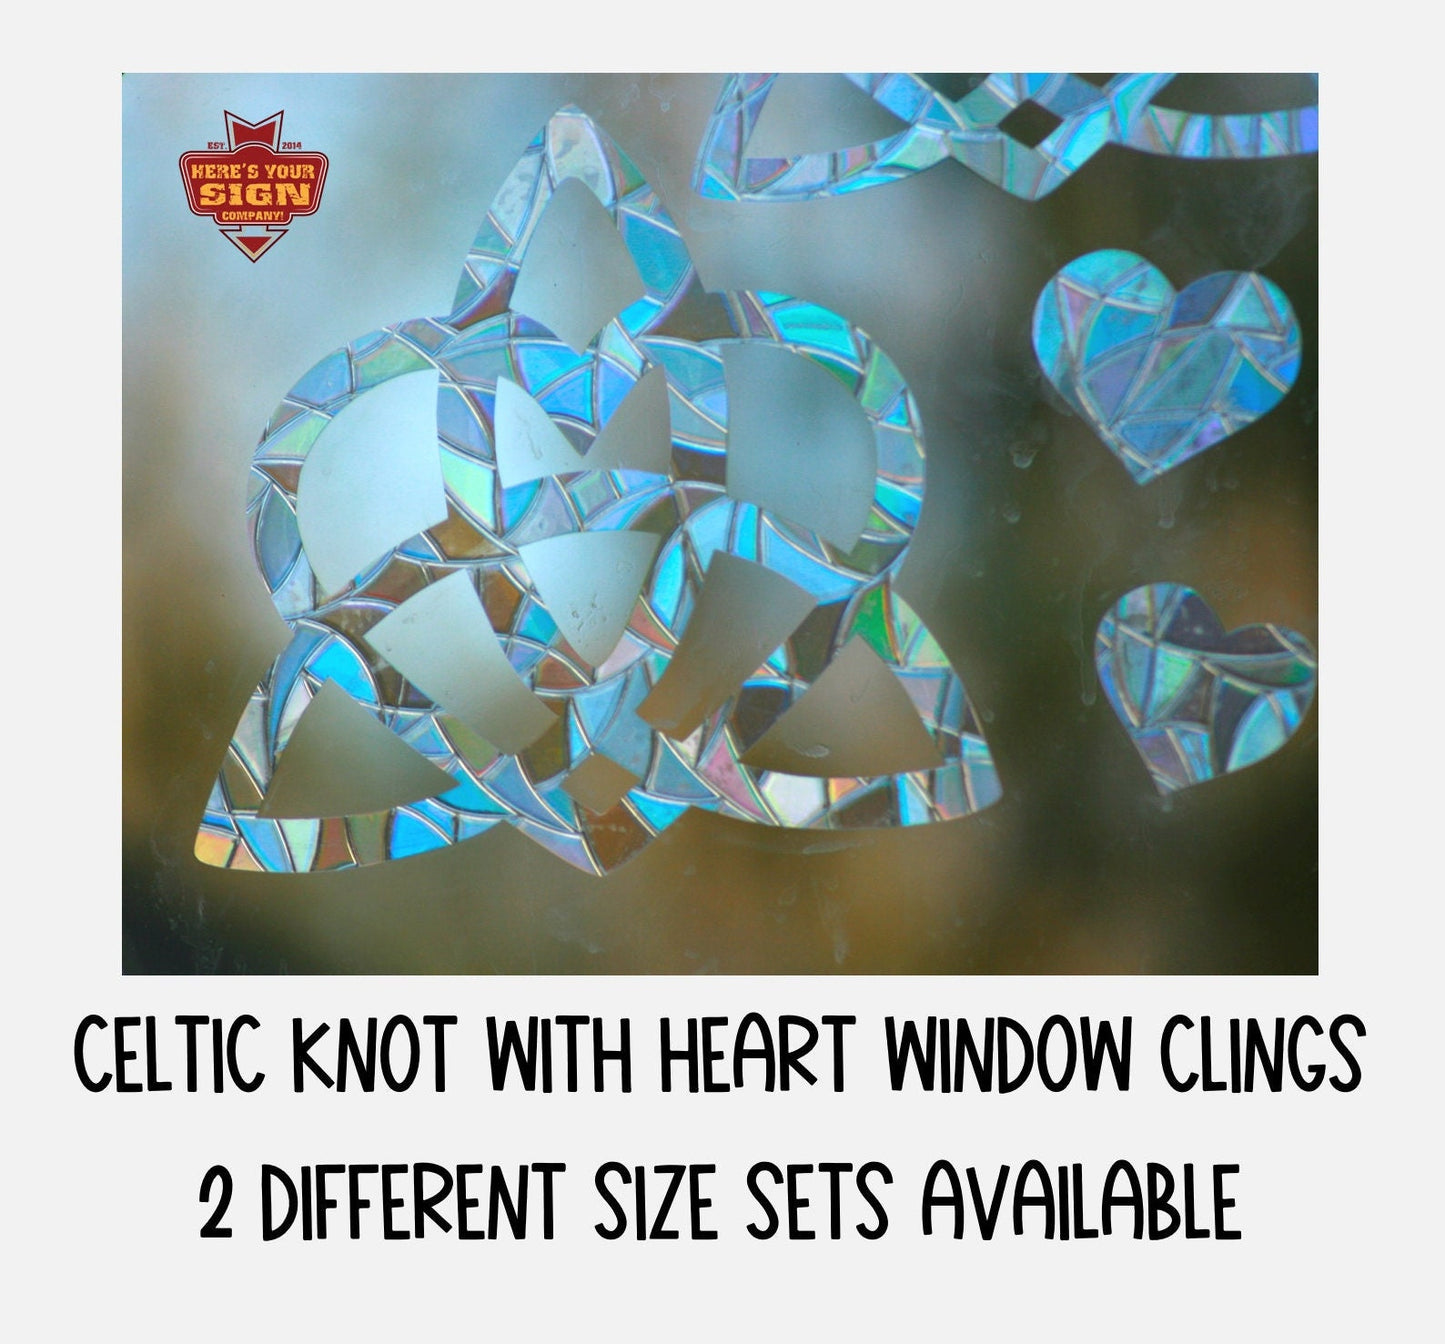 Celtic Knot with Heart. Two size options. Charmed Triquetra Window Clings. Sun Catcher. Rainbow Prism Decoration. Static Window Cling.